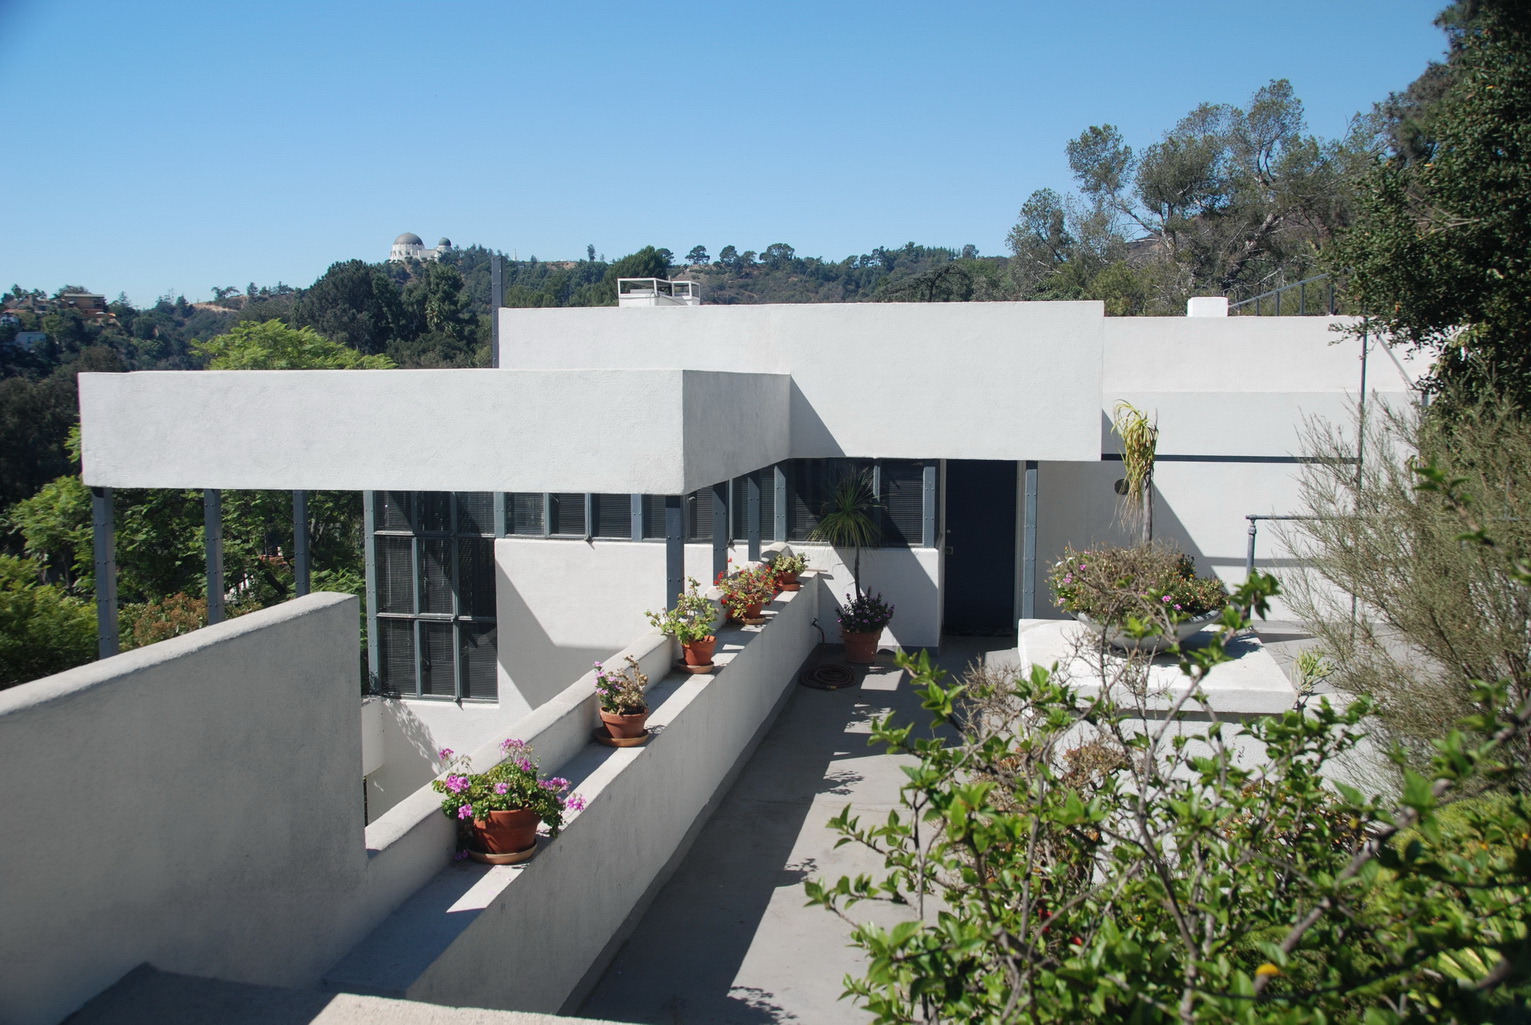 Exterior of a white boxy building, the Lovell House, in California